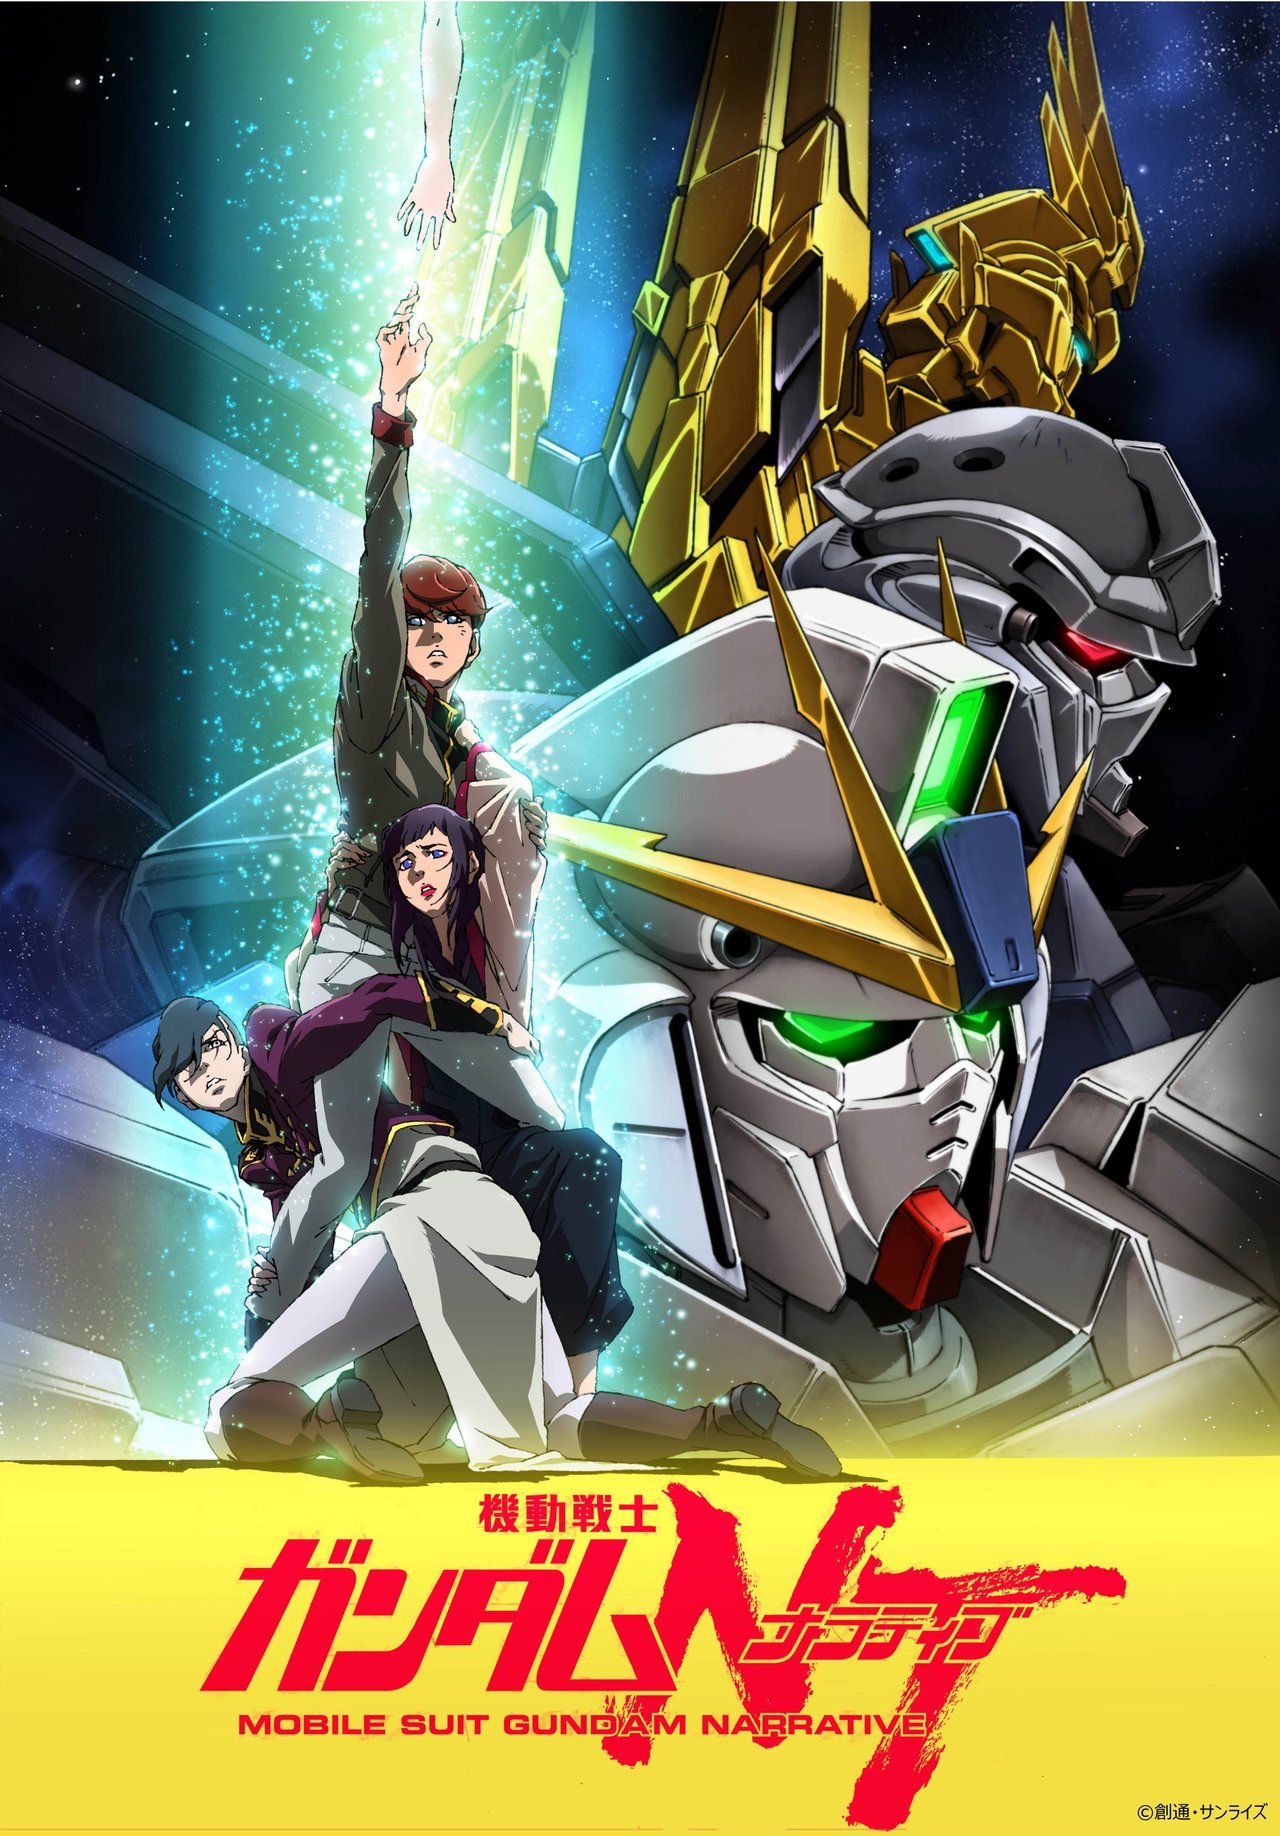 A new promotional video, poster visual, and cast for the UC Gundam film, Ã¢ÂÂMobile Suit Gundam NTÃ¢ÂÂ has been published. It will open in Japanese theaters on November 30th. -Staff-Ã¢ÂÂ¢ Director: Shunichi Yoshizawa Ã¢ÂÂ¢ Script: Harutoshi Fukui Ã¢ÂÂ¢ Character...